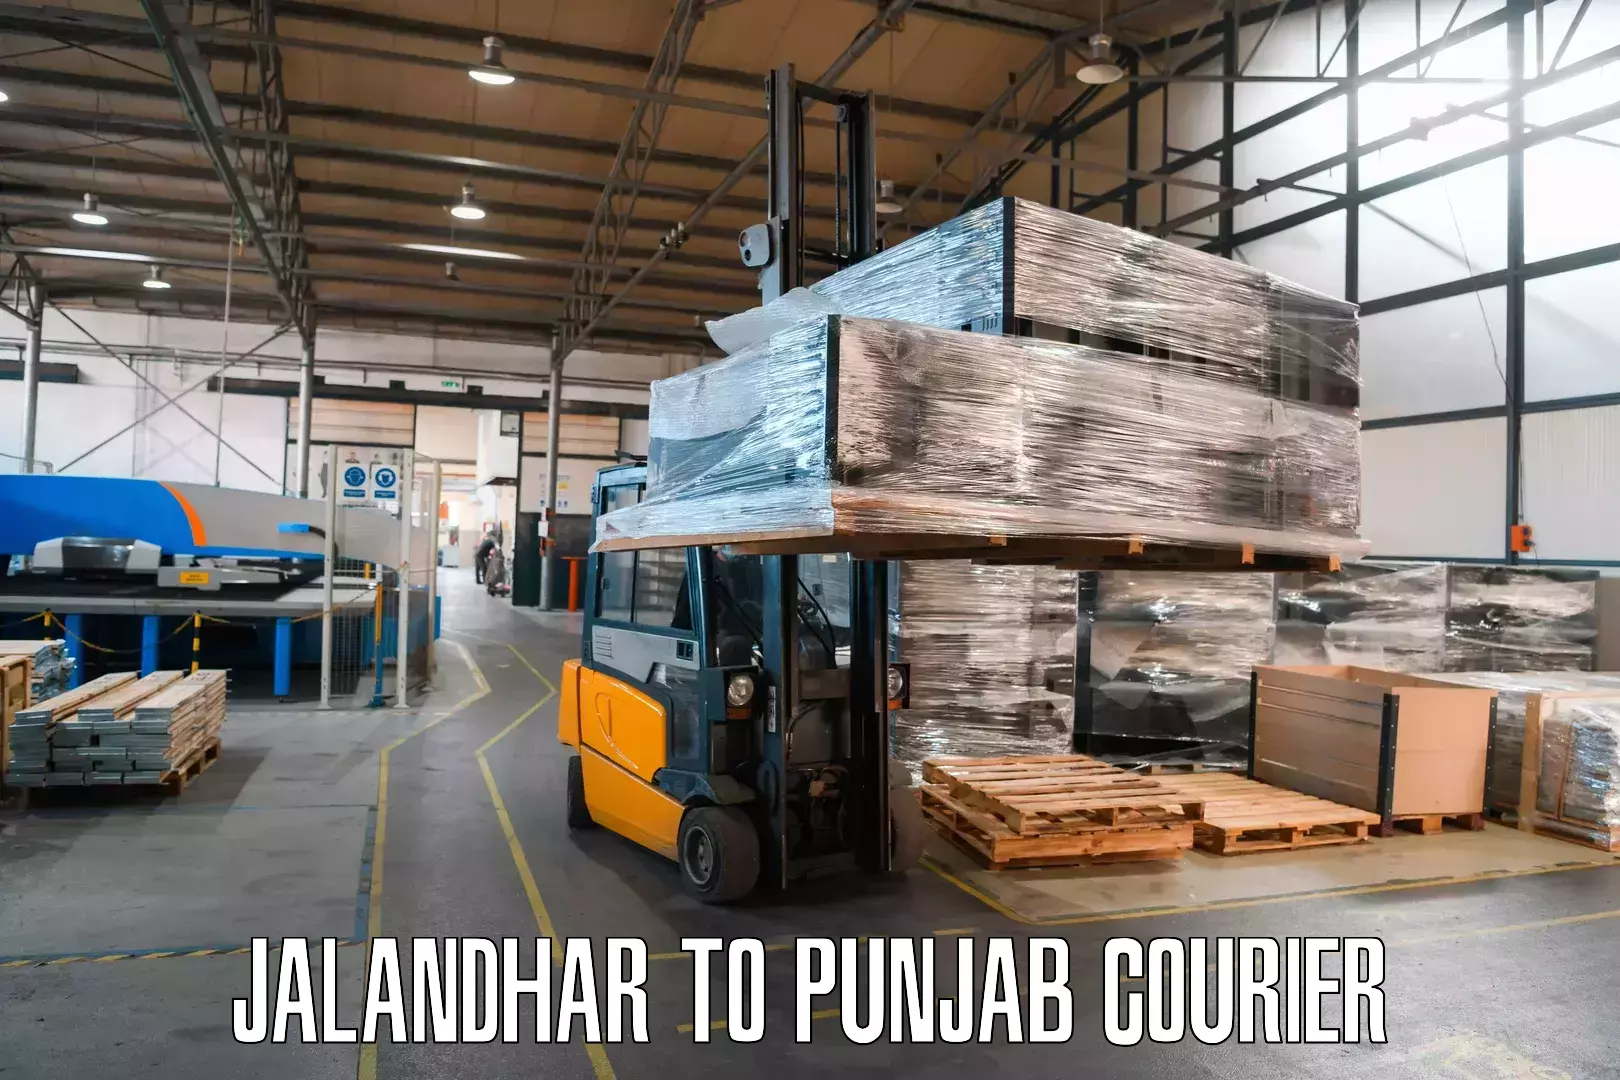 State-of-the-art courier technology Jalandhar to Ajnala